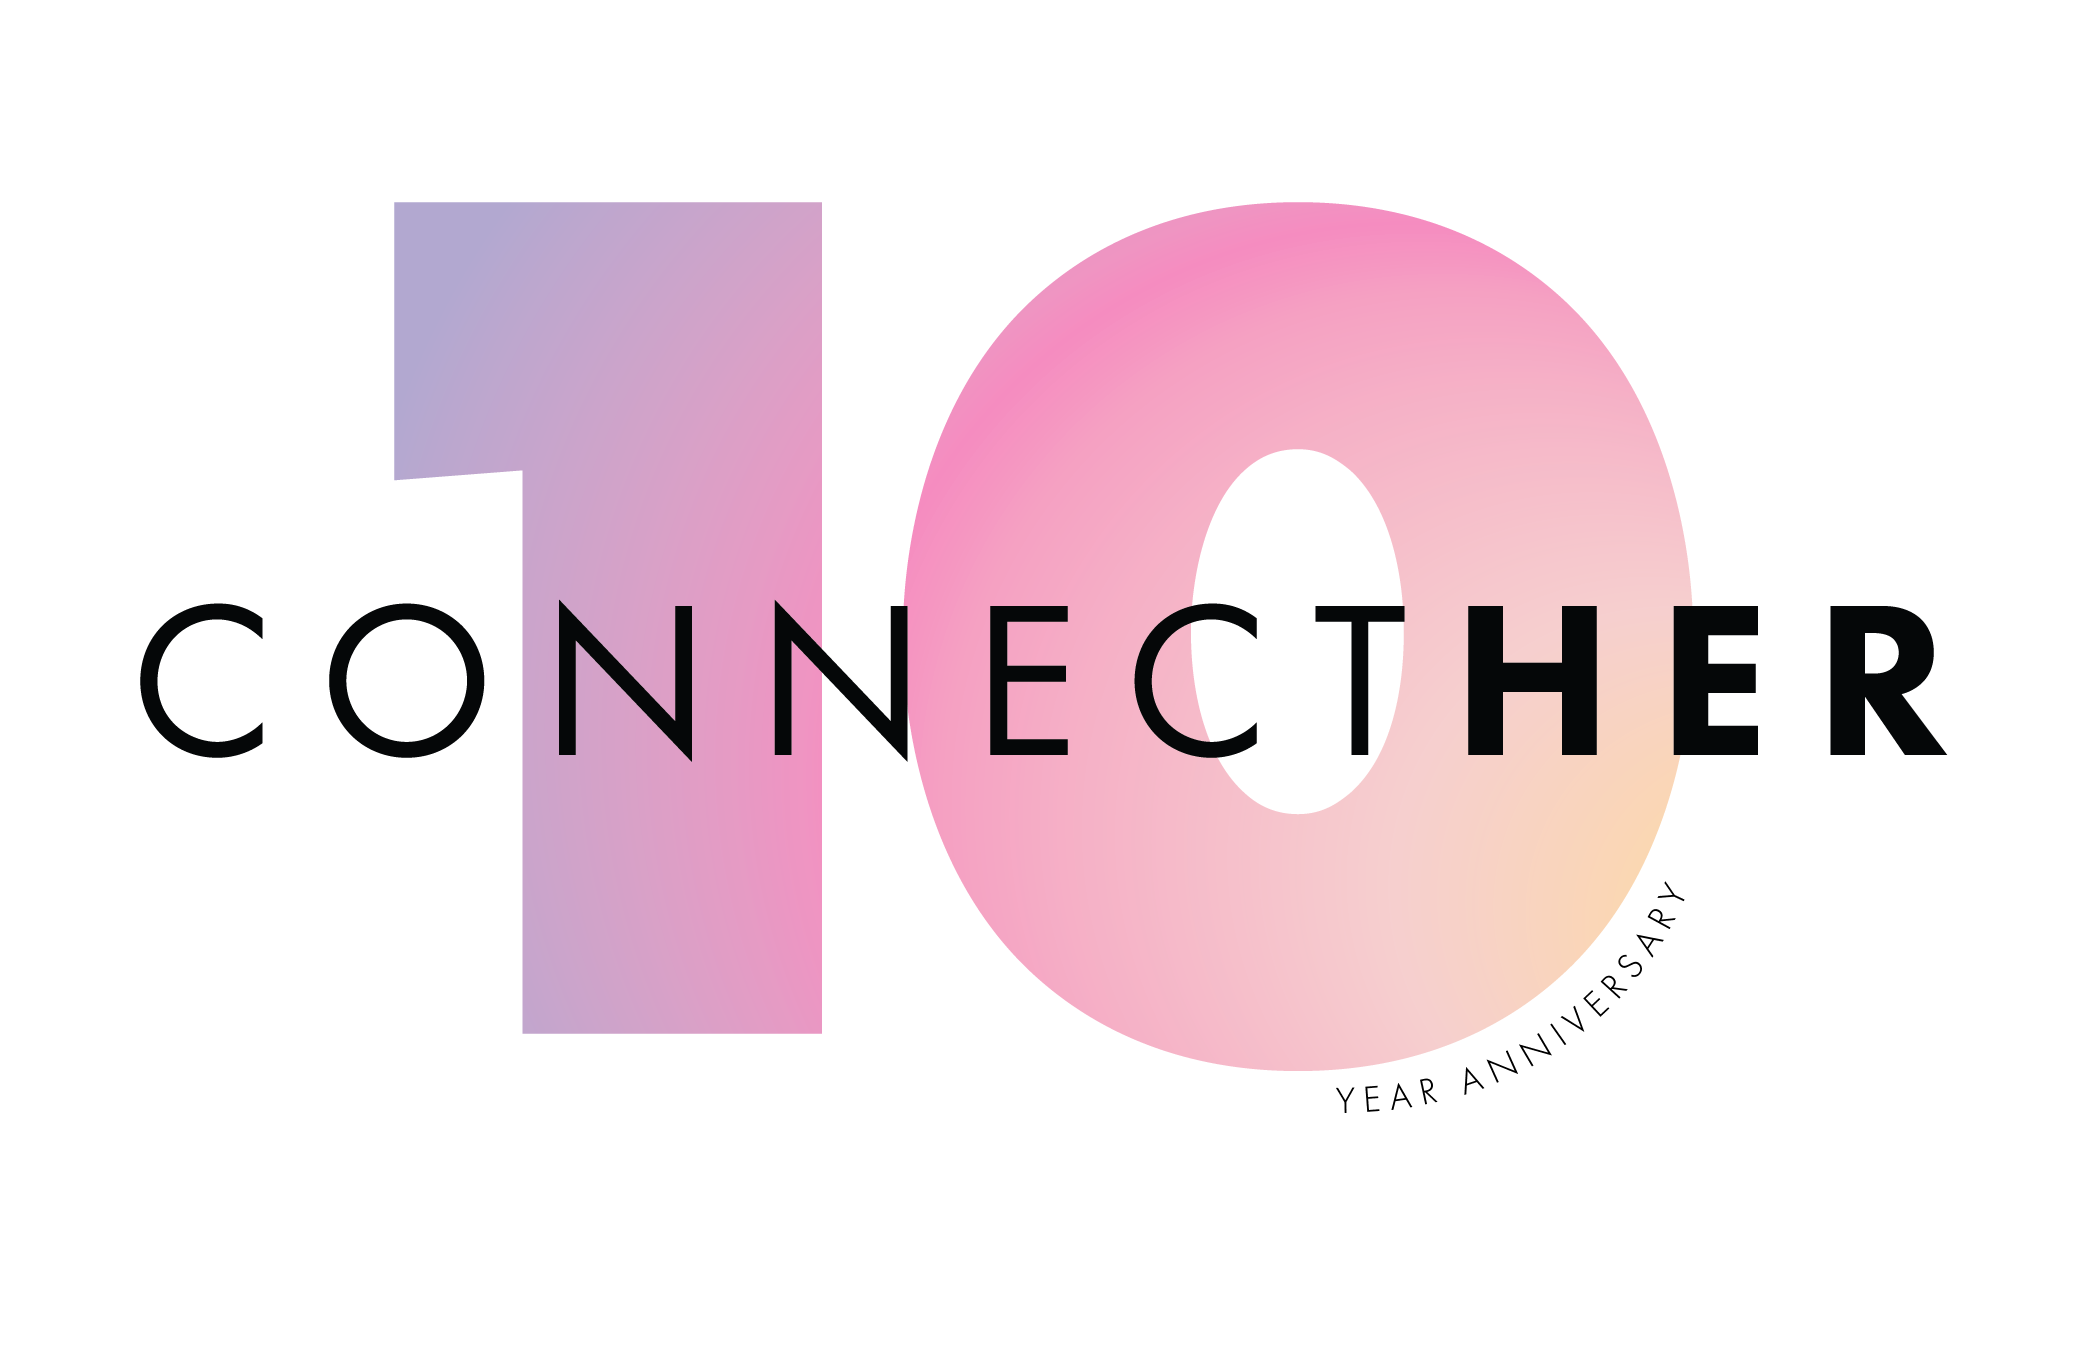 Connecther 10 year anniversary logo